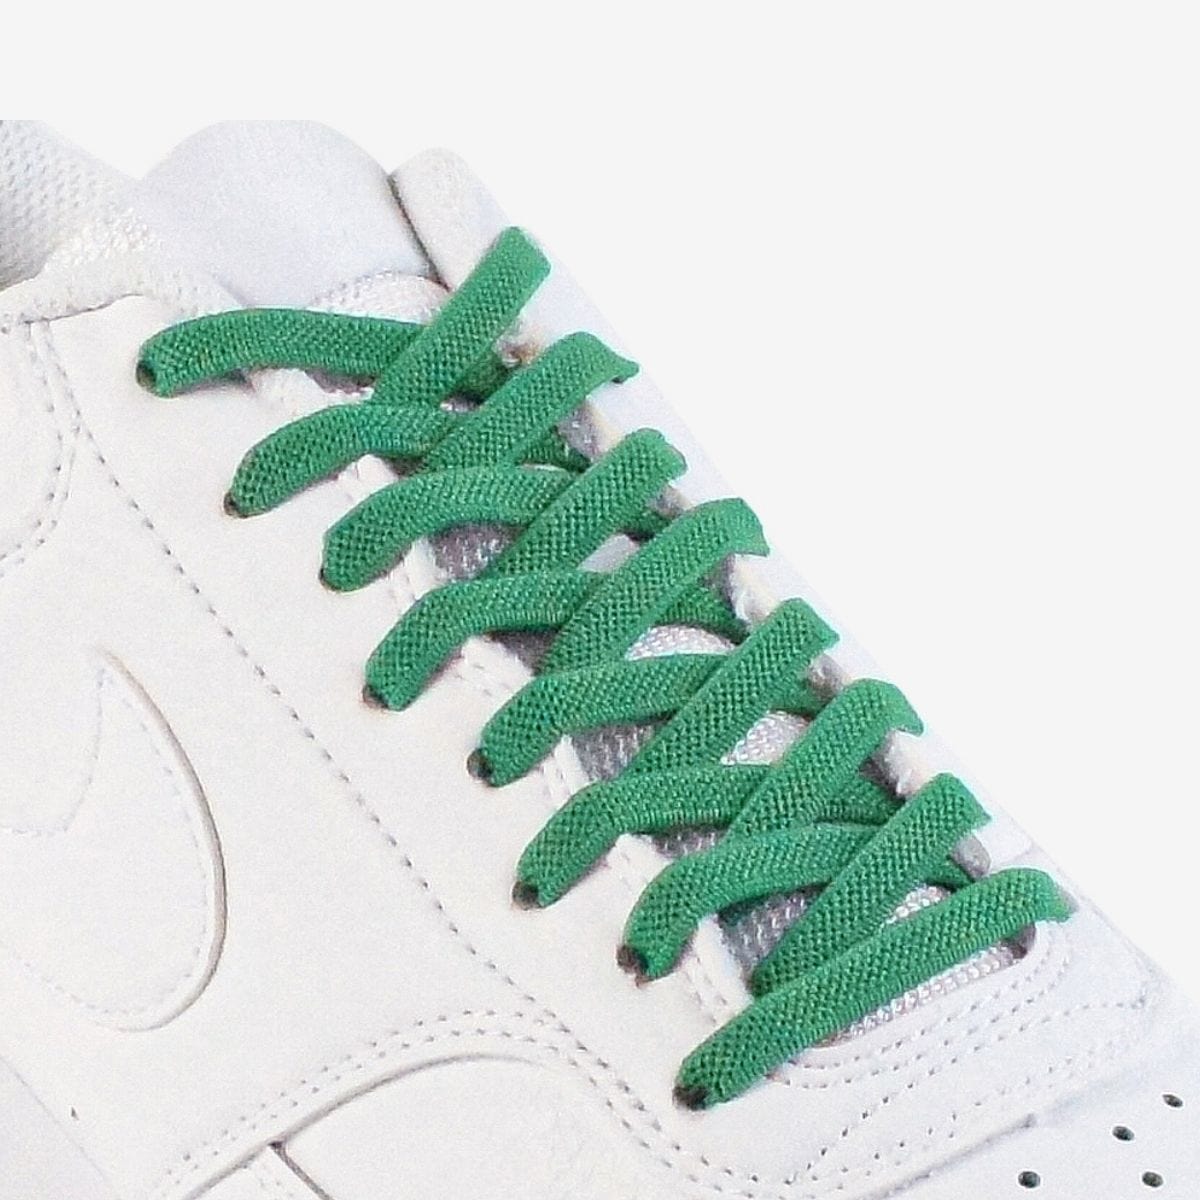 kids-no-tie-shoelaces-with-green-laces-on-nike-white-sneakers-by-kicks-shoelaces